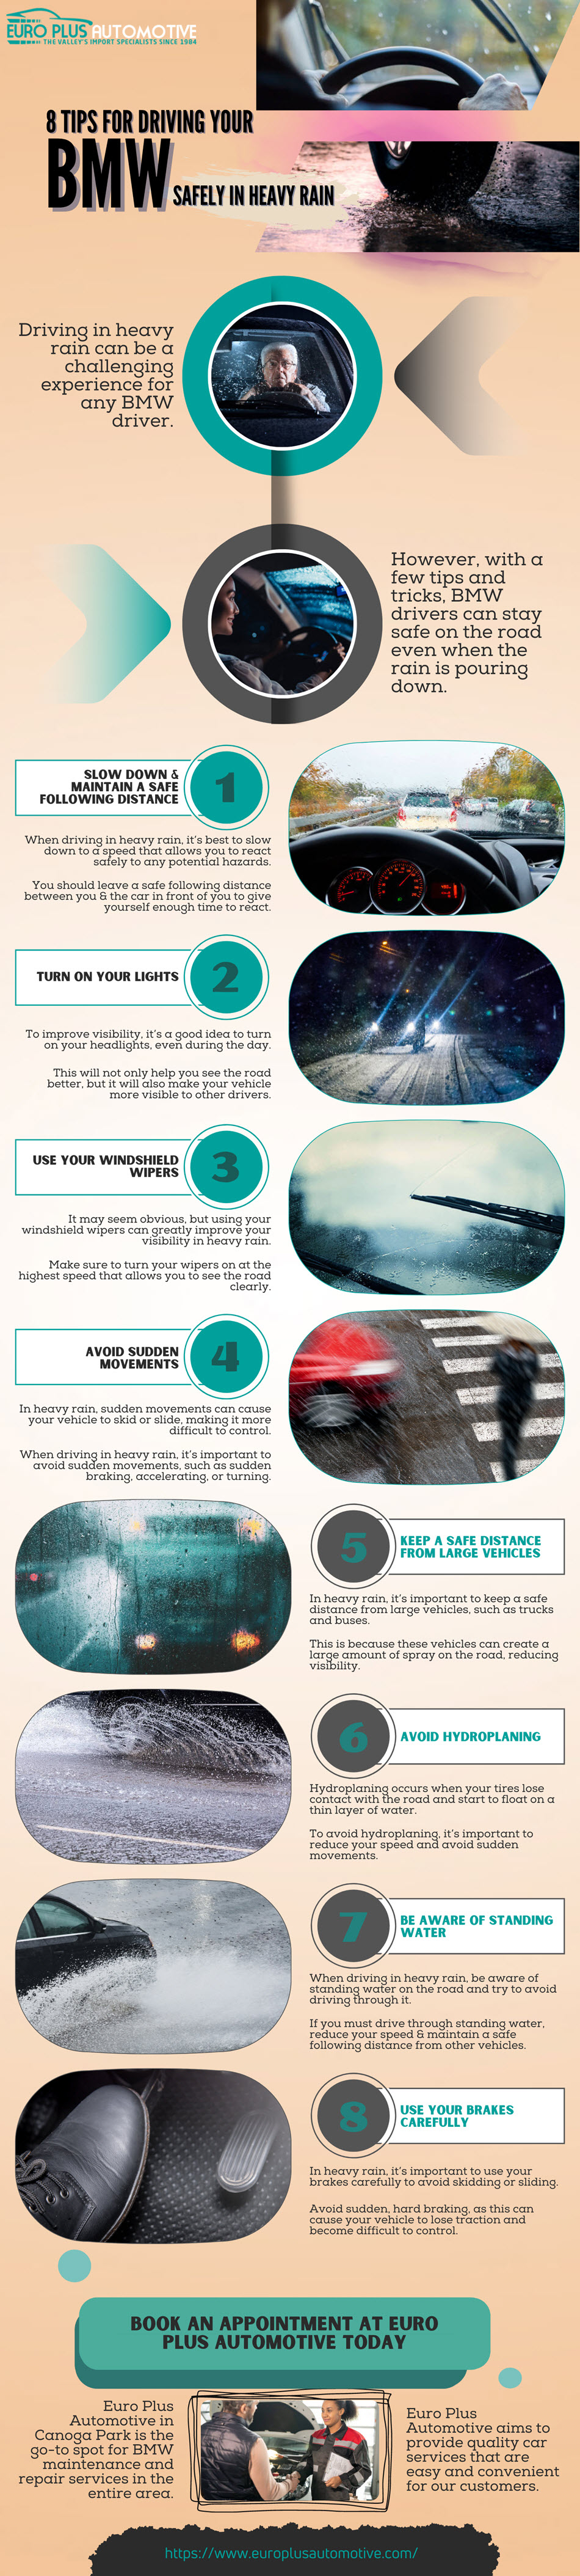 8 Tips for Driving Your BMW Safely in Heavy Rain